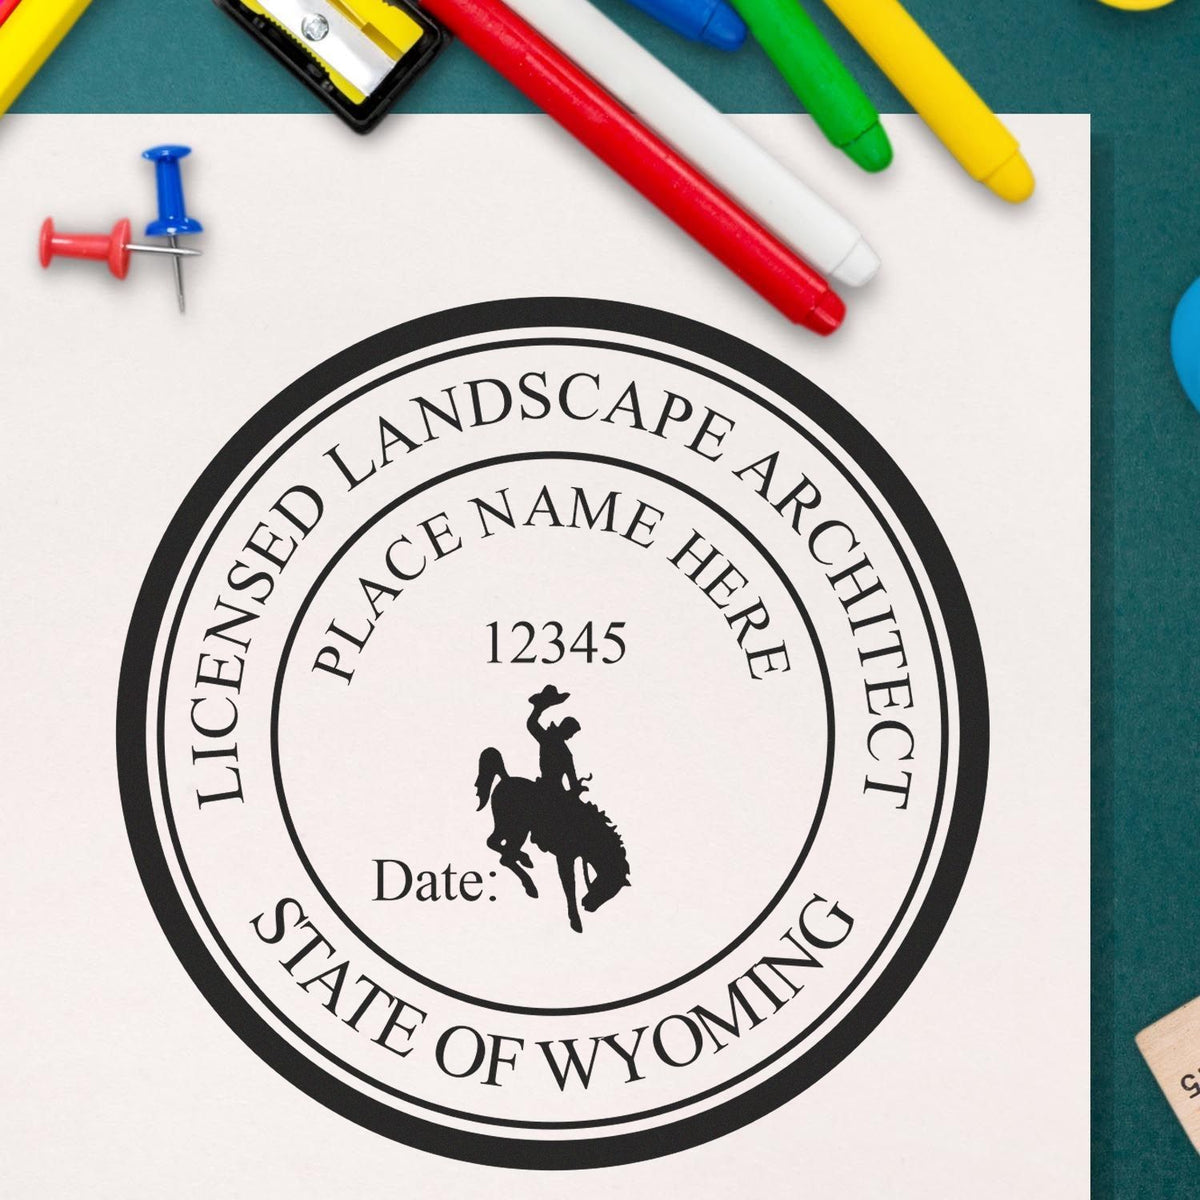 A lifestyle photo showing a stamped image of the Digital Wyoming Landscape Architect Stamp on a piece of paper